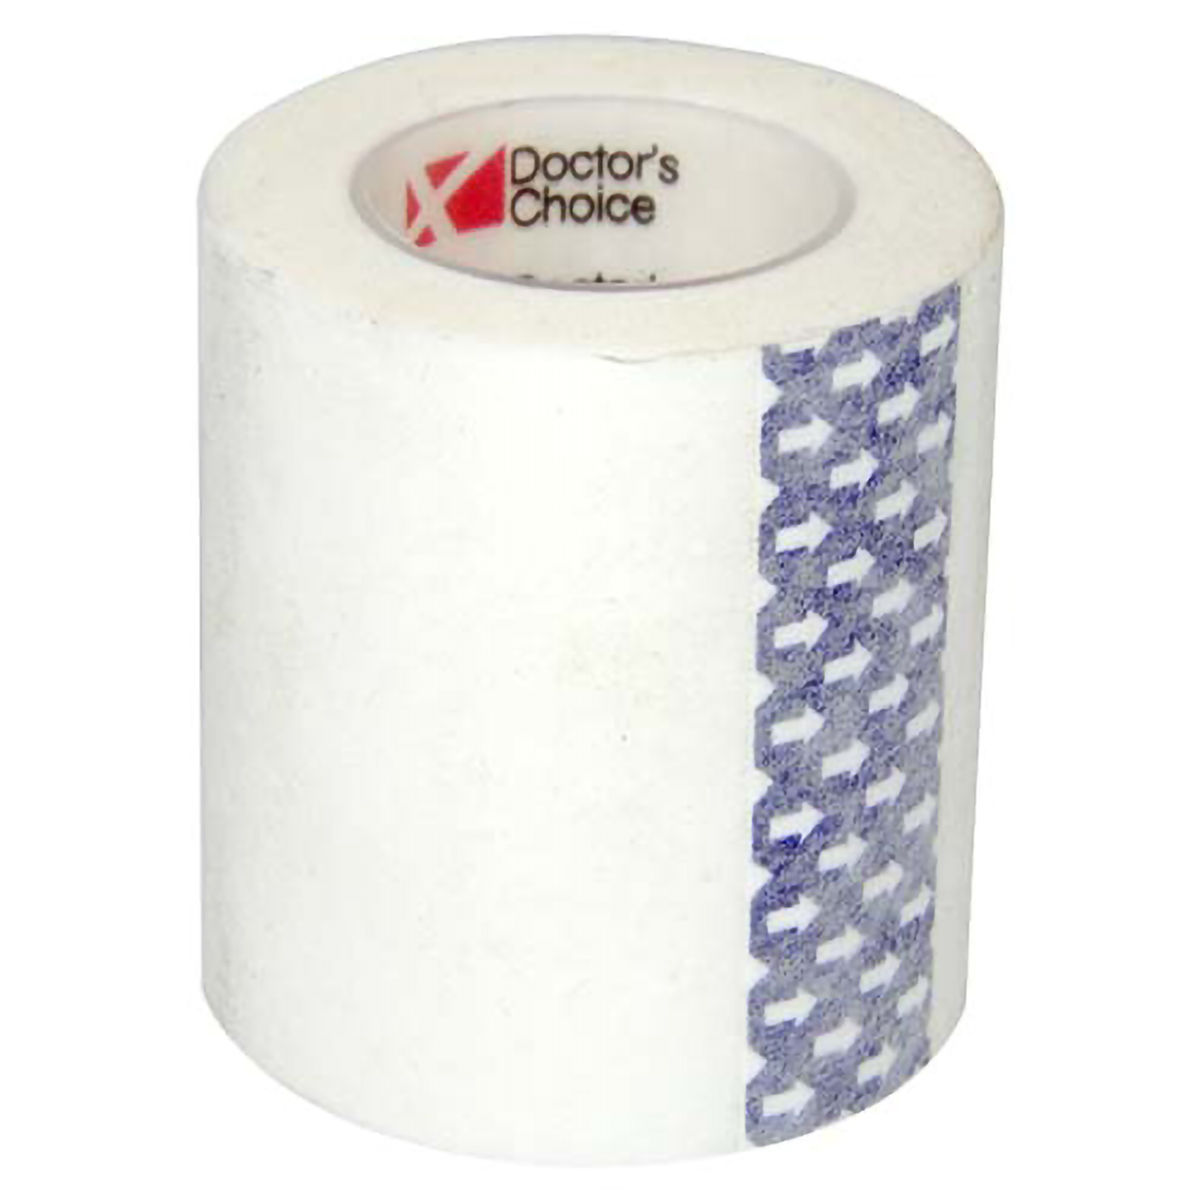 Buy Doctor's Choice Micropors Surgical Tape 2 Inch, 1 Count Online